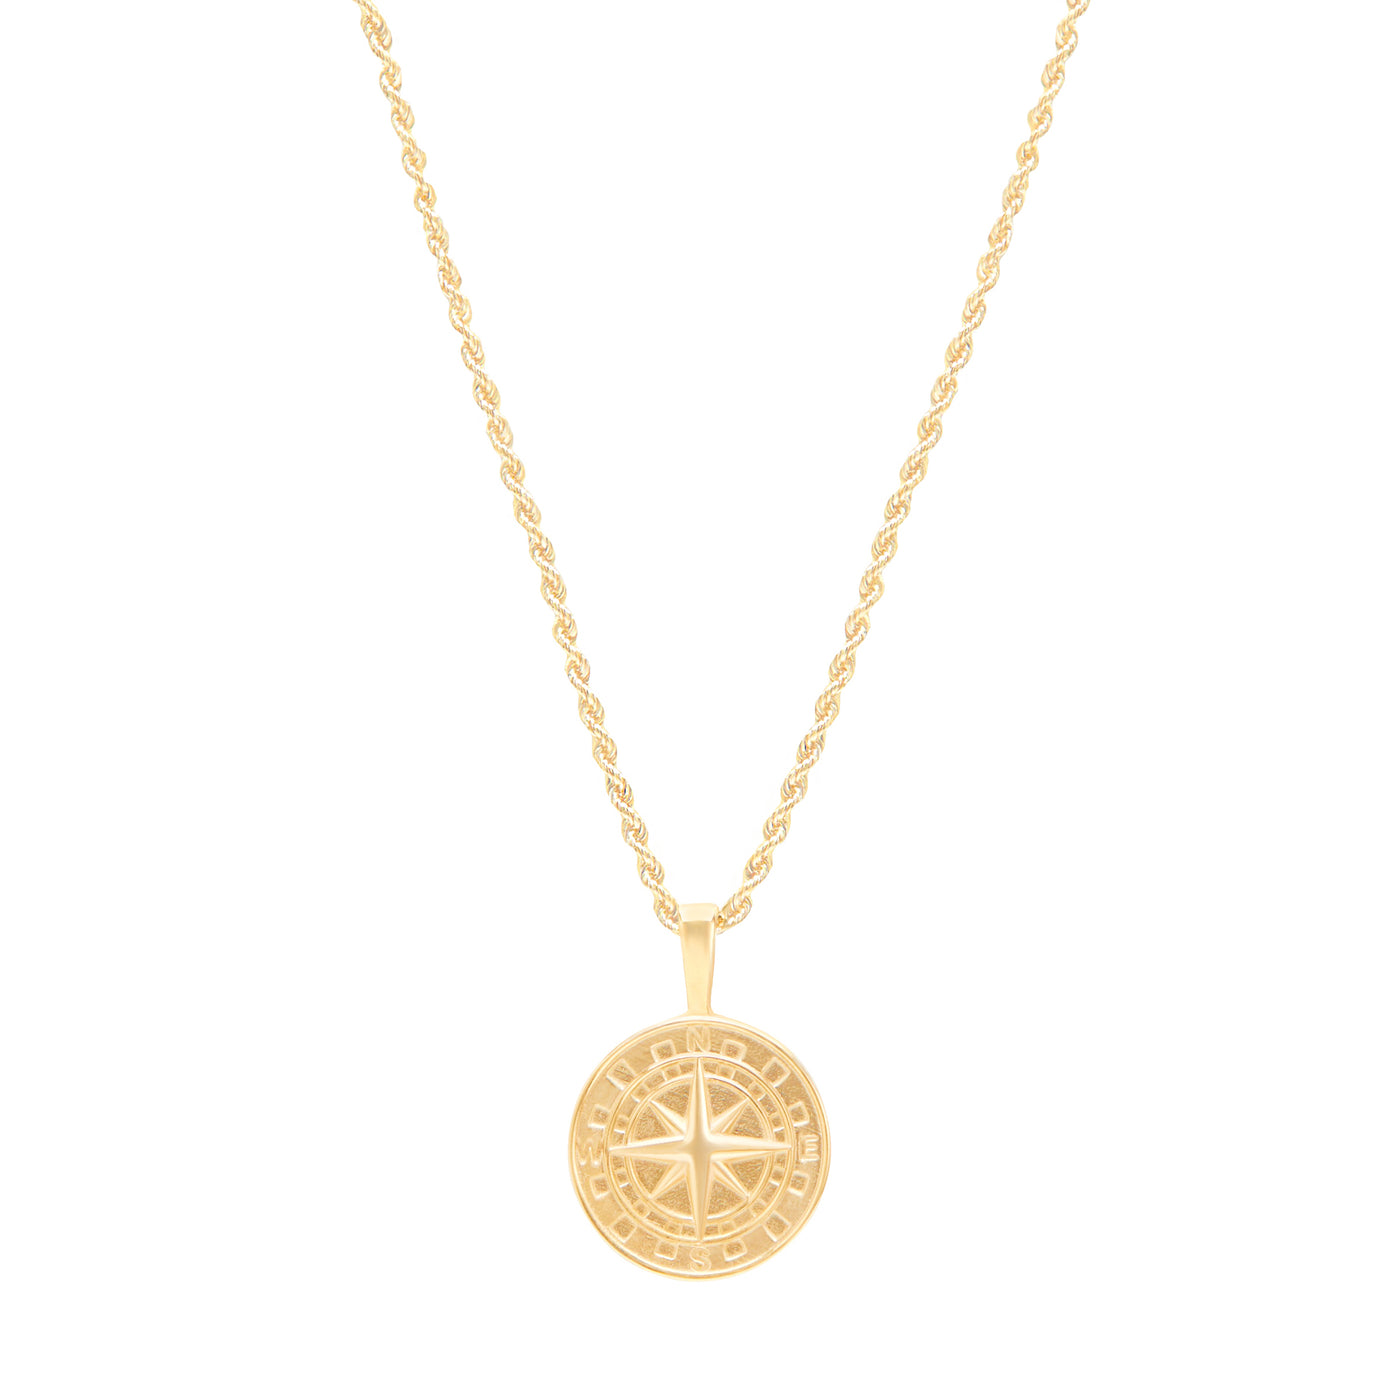 Compass pendant yellow gold on rope chain on white background